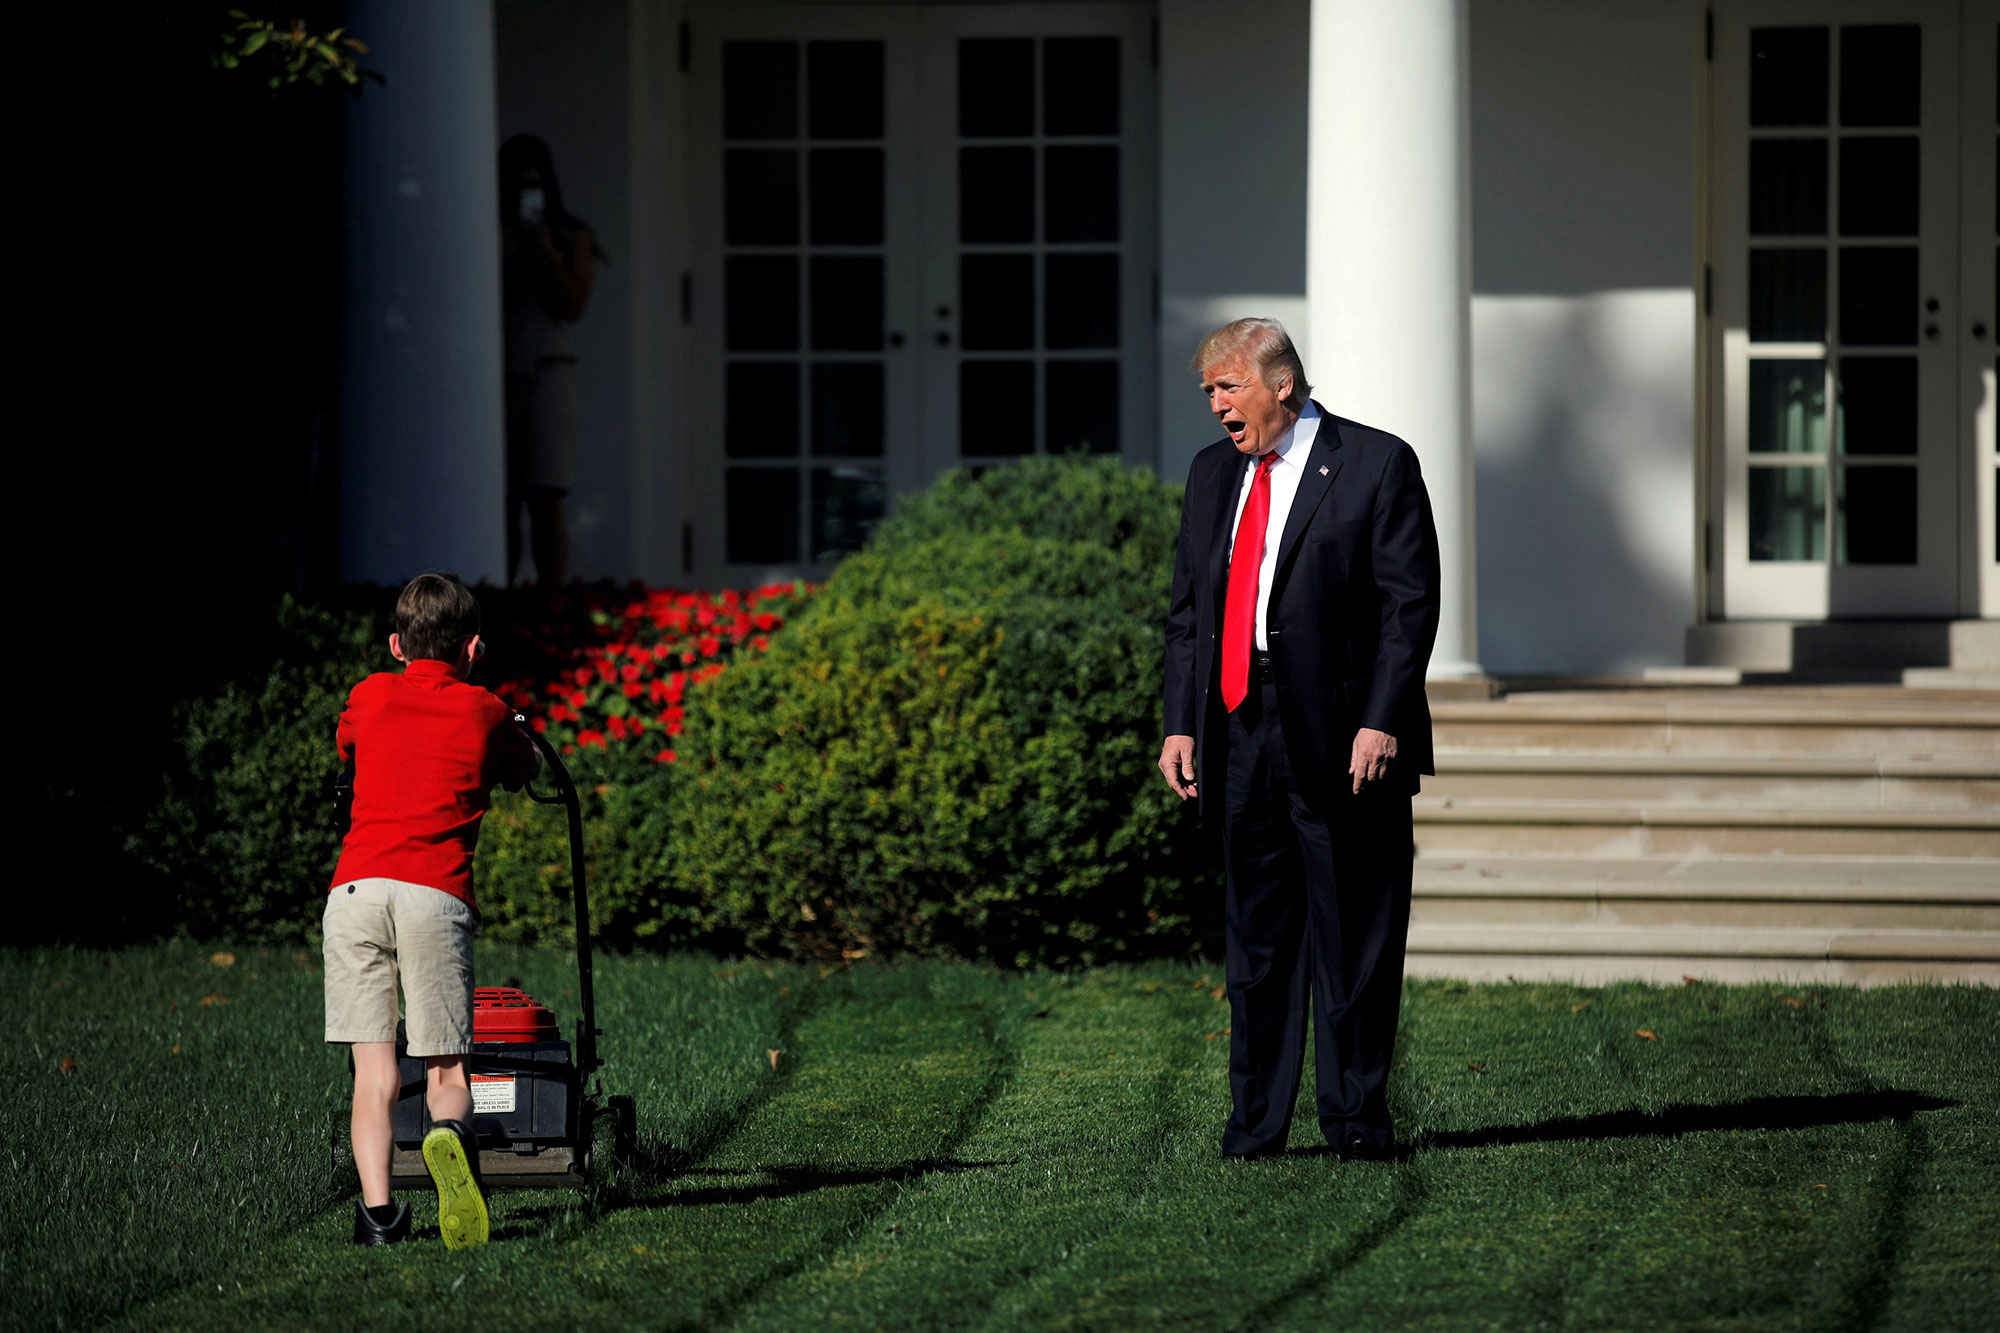 Trump welcomes 11-year-old Frank Giaccio as he mows the lawn in the Rose Garden on Sept. 15, 2017.